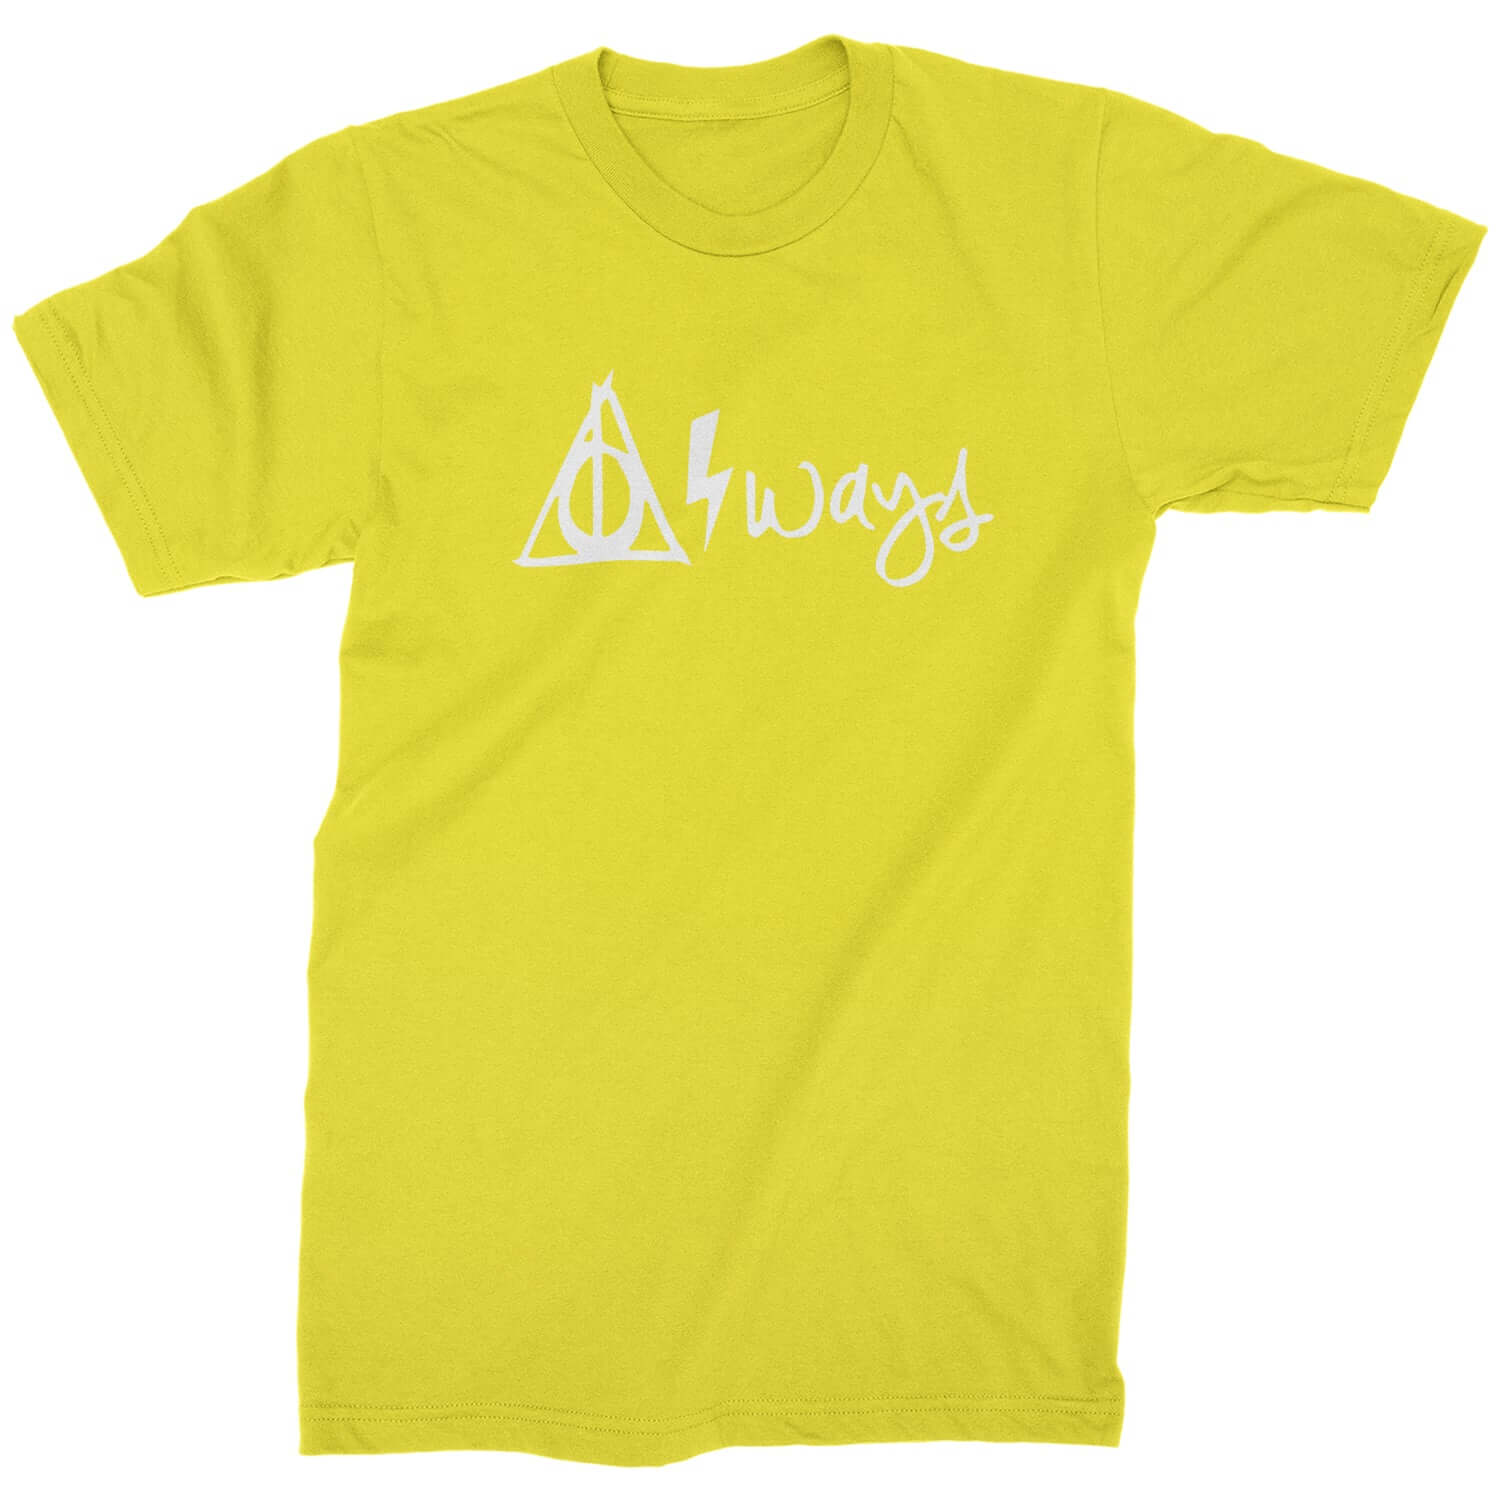 Always Lightning Bolt Mens T-shirt #expressiontees by Expression Tees